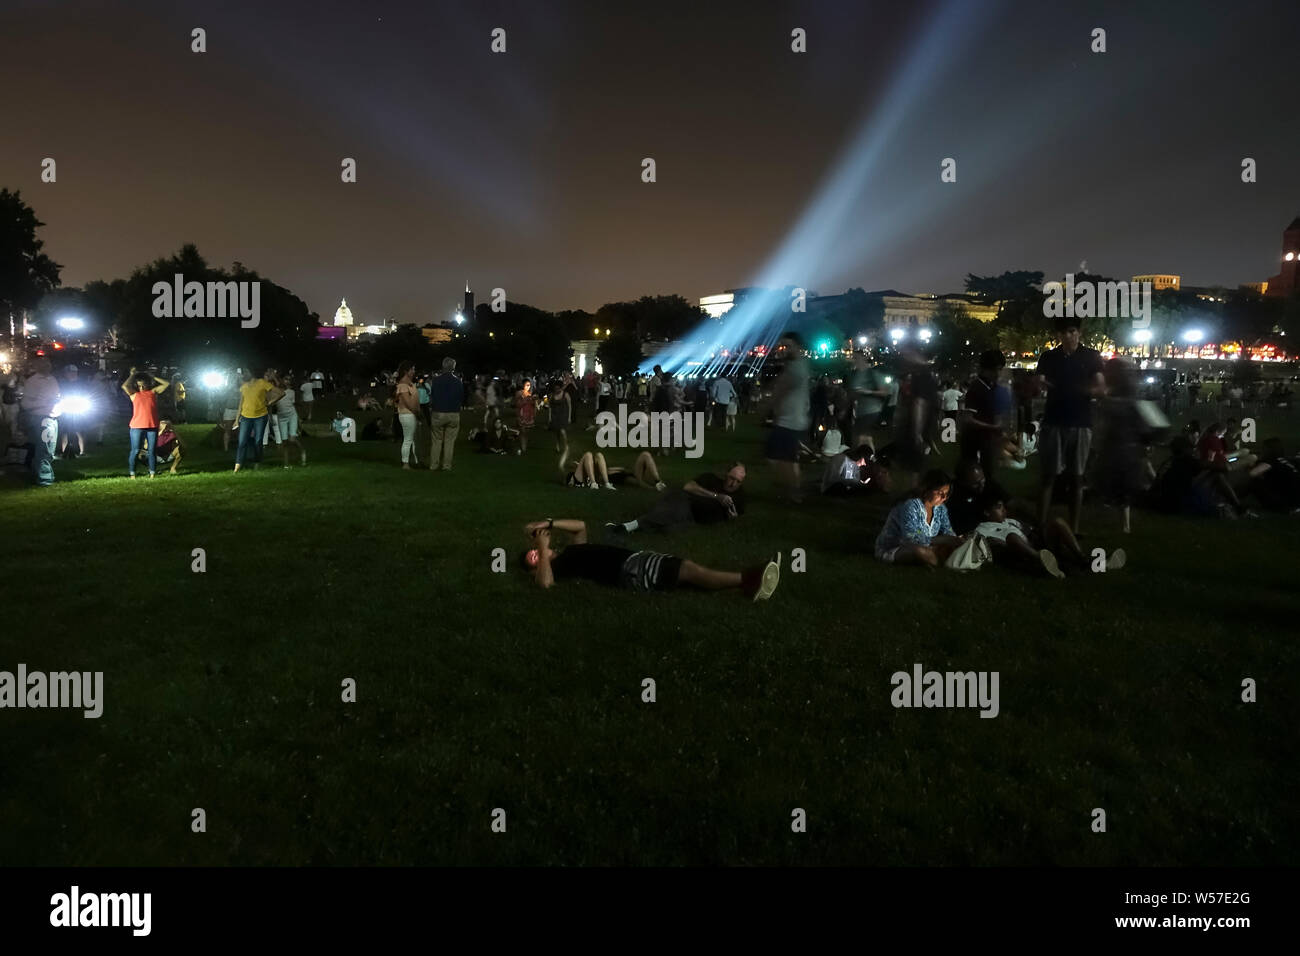 Washington, DC - July 18, 2019. Celebrating the 50th anniversary of the first lunar landing, tourists and locals gaze up at an image of the Saturn V rocket which is projected onto the Washington Monument, part of a five-day commemorating the Apollo 11 moon landing in 1969. Stock Photo